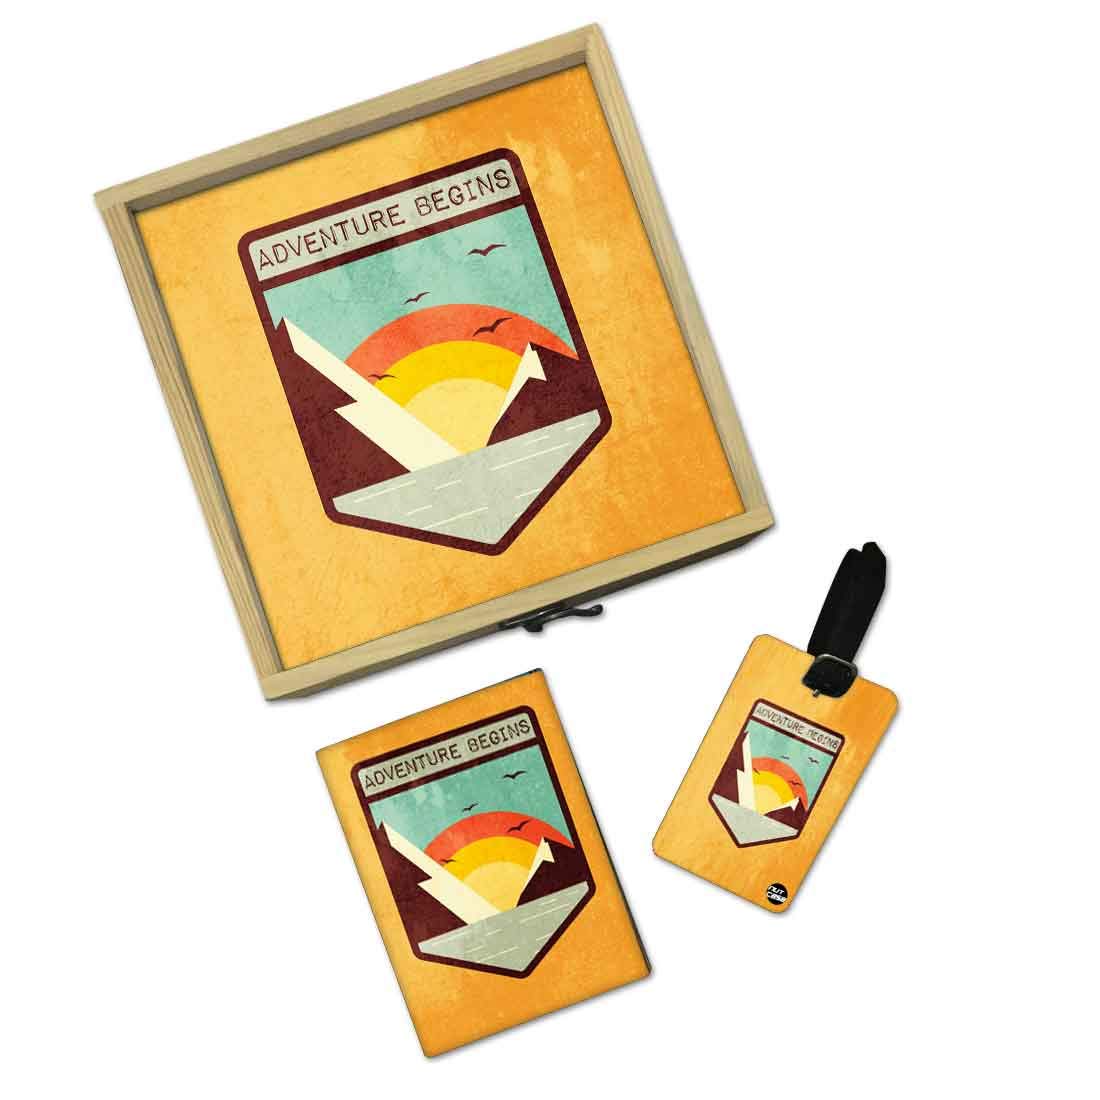 Passport Cover Luggage Tag Wooden Gift Box Set - Adventure Begins